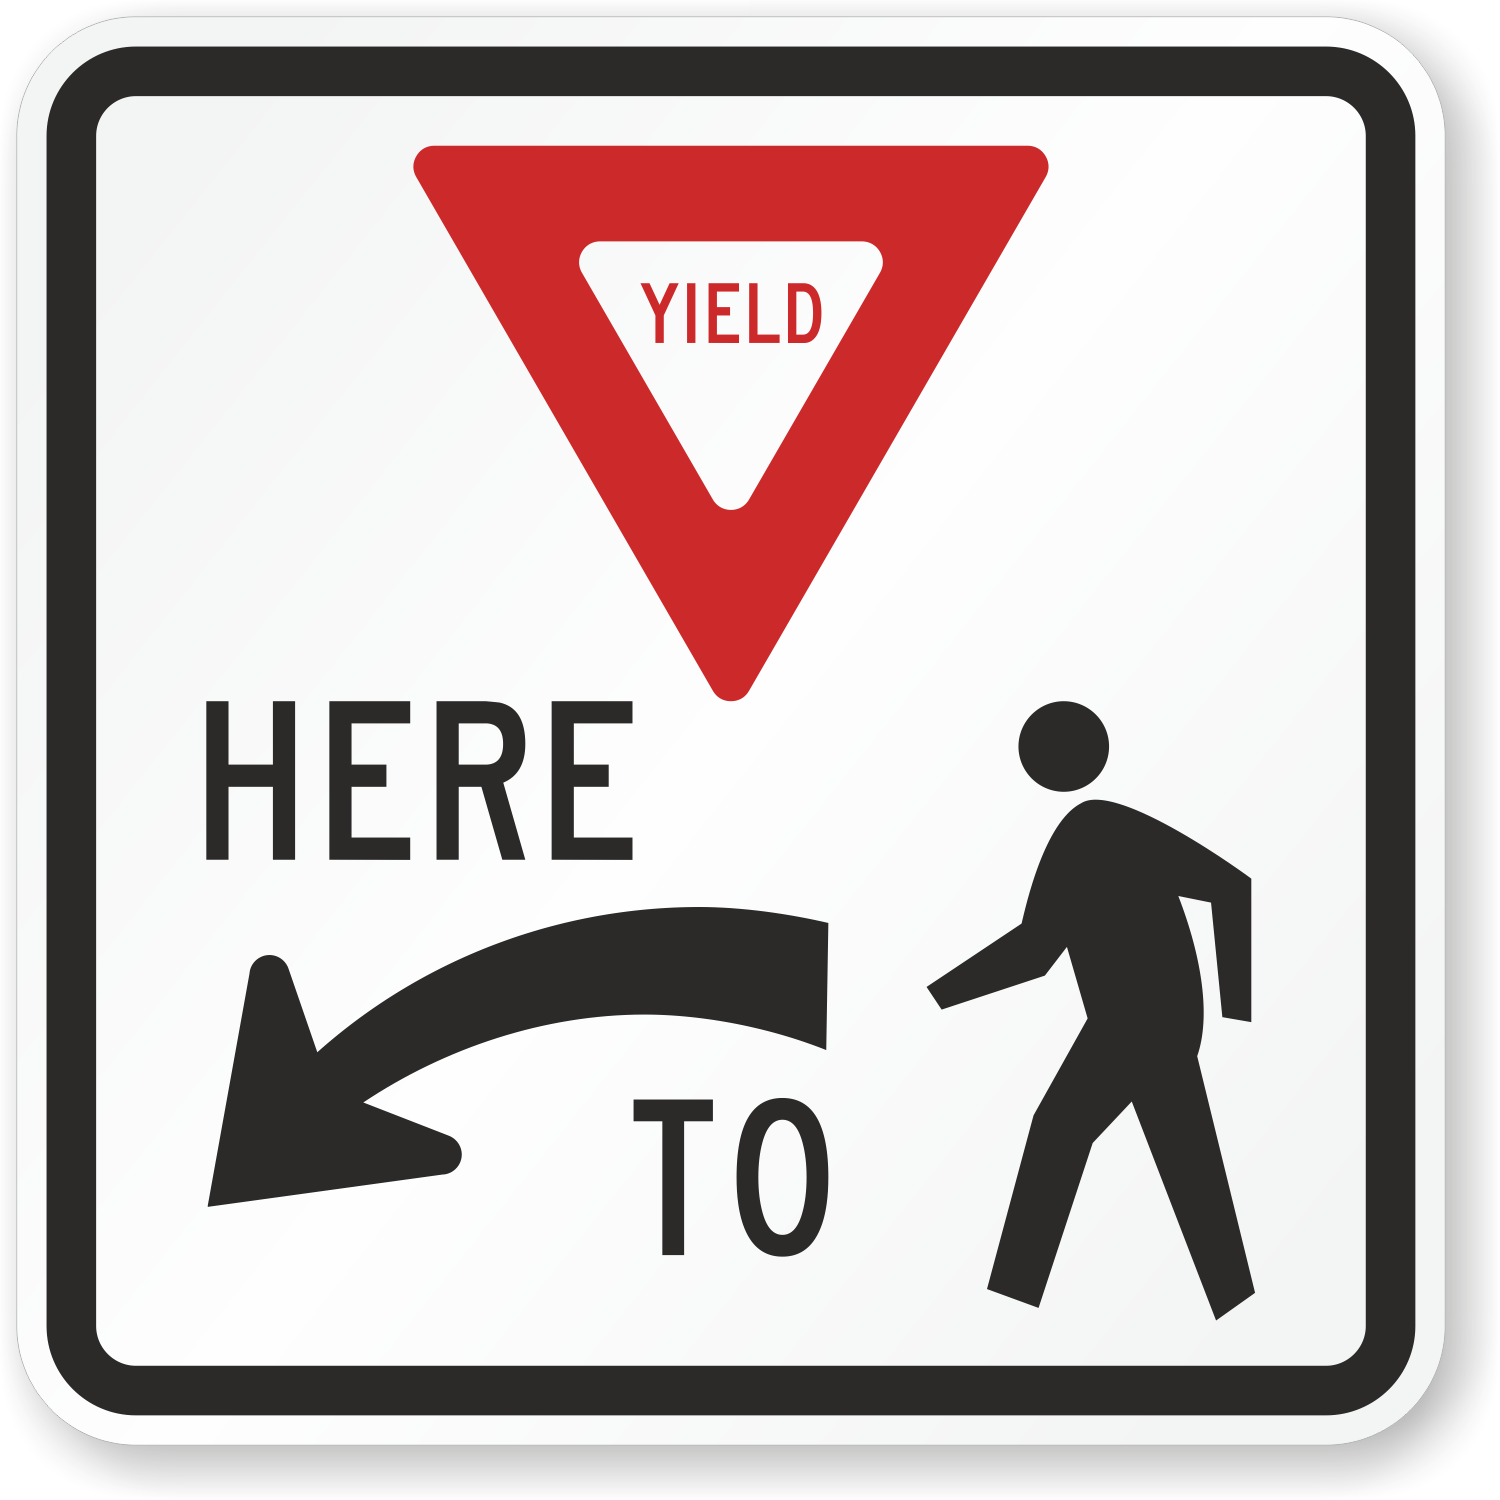 Shop Road Symbol Signs  Official MUTCD Compliant Signs